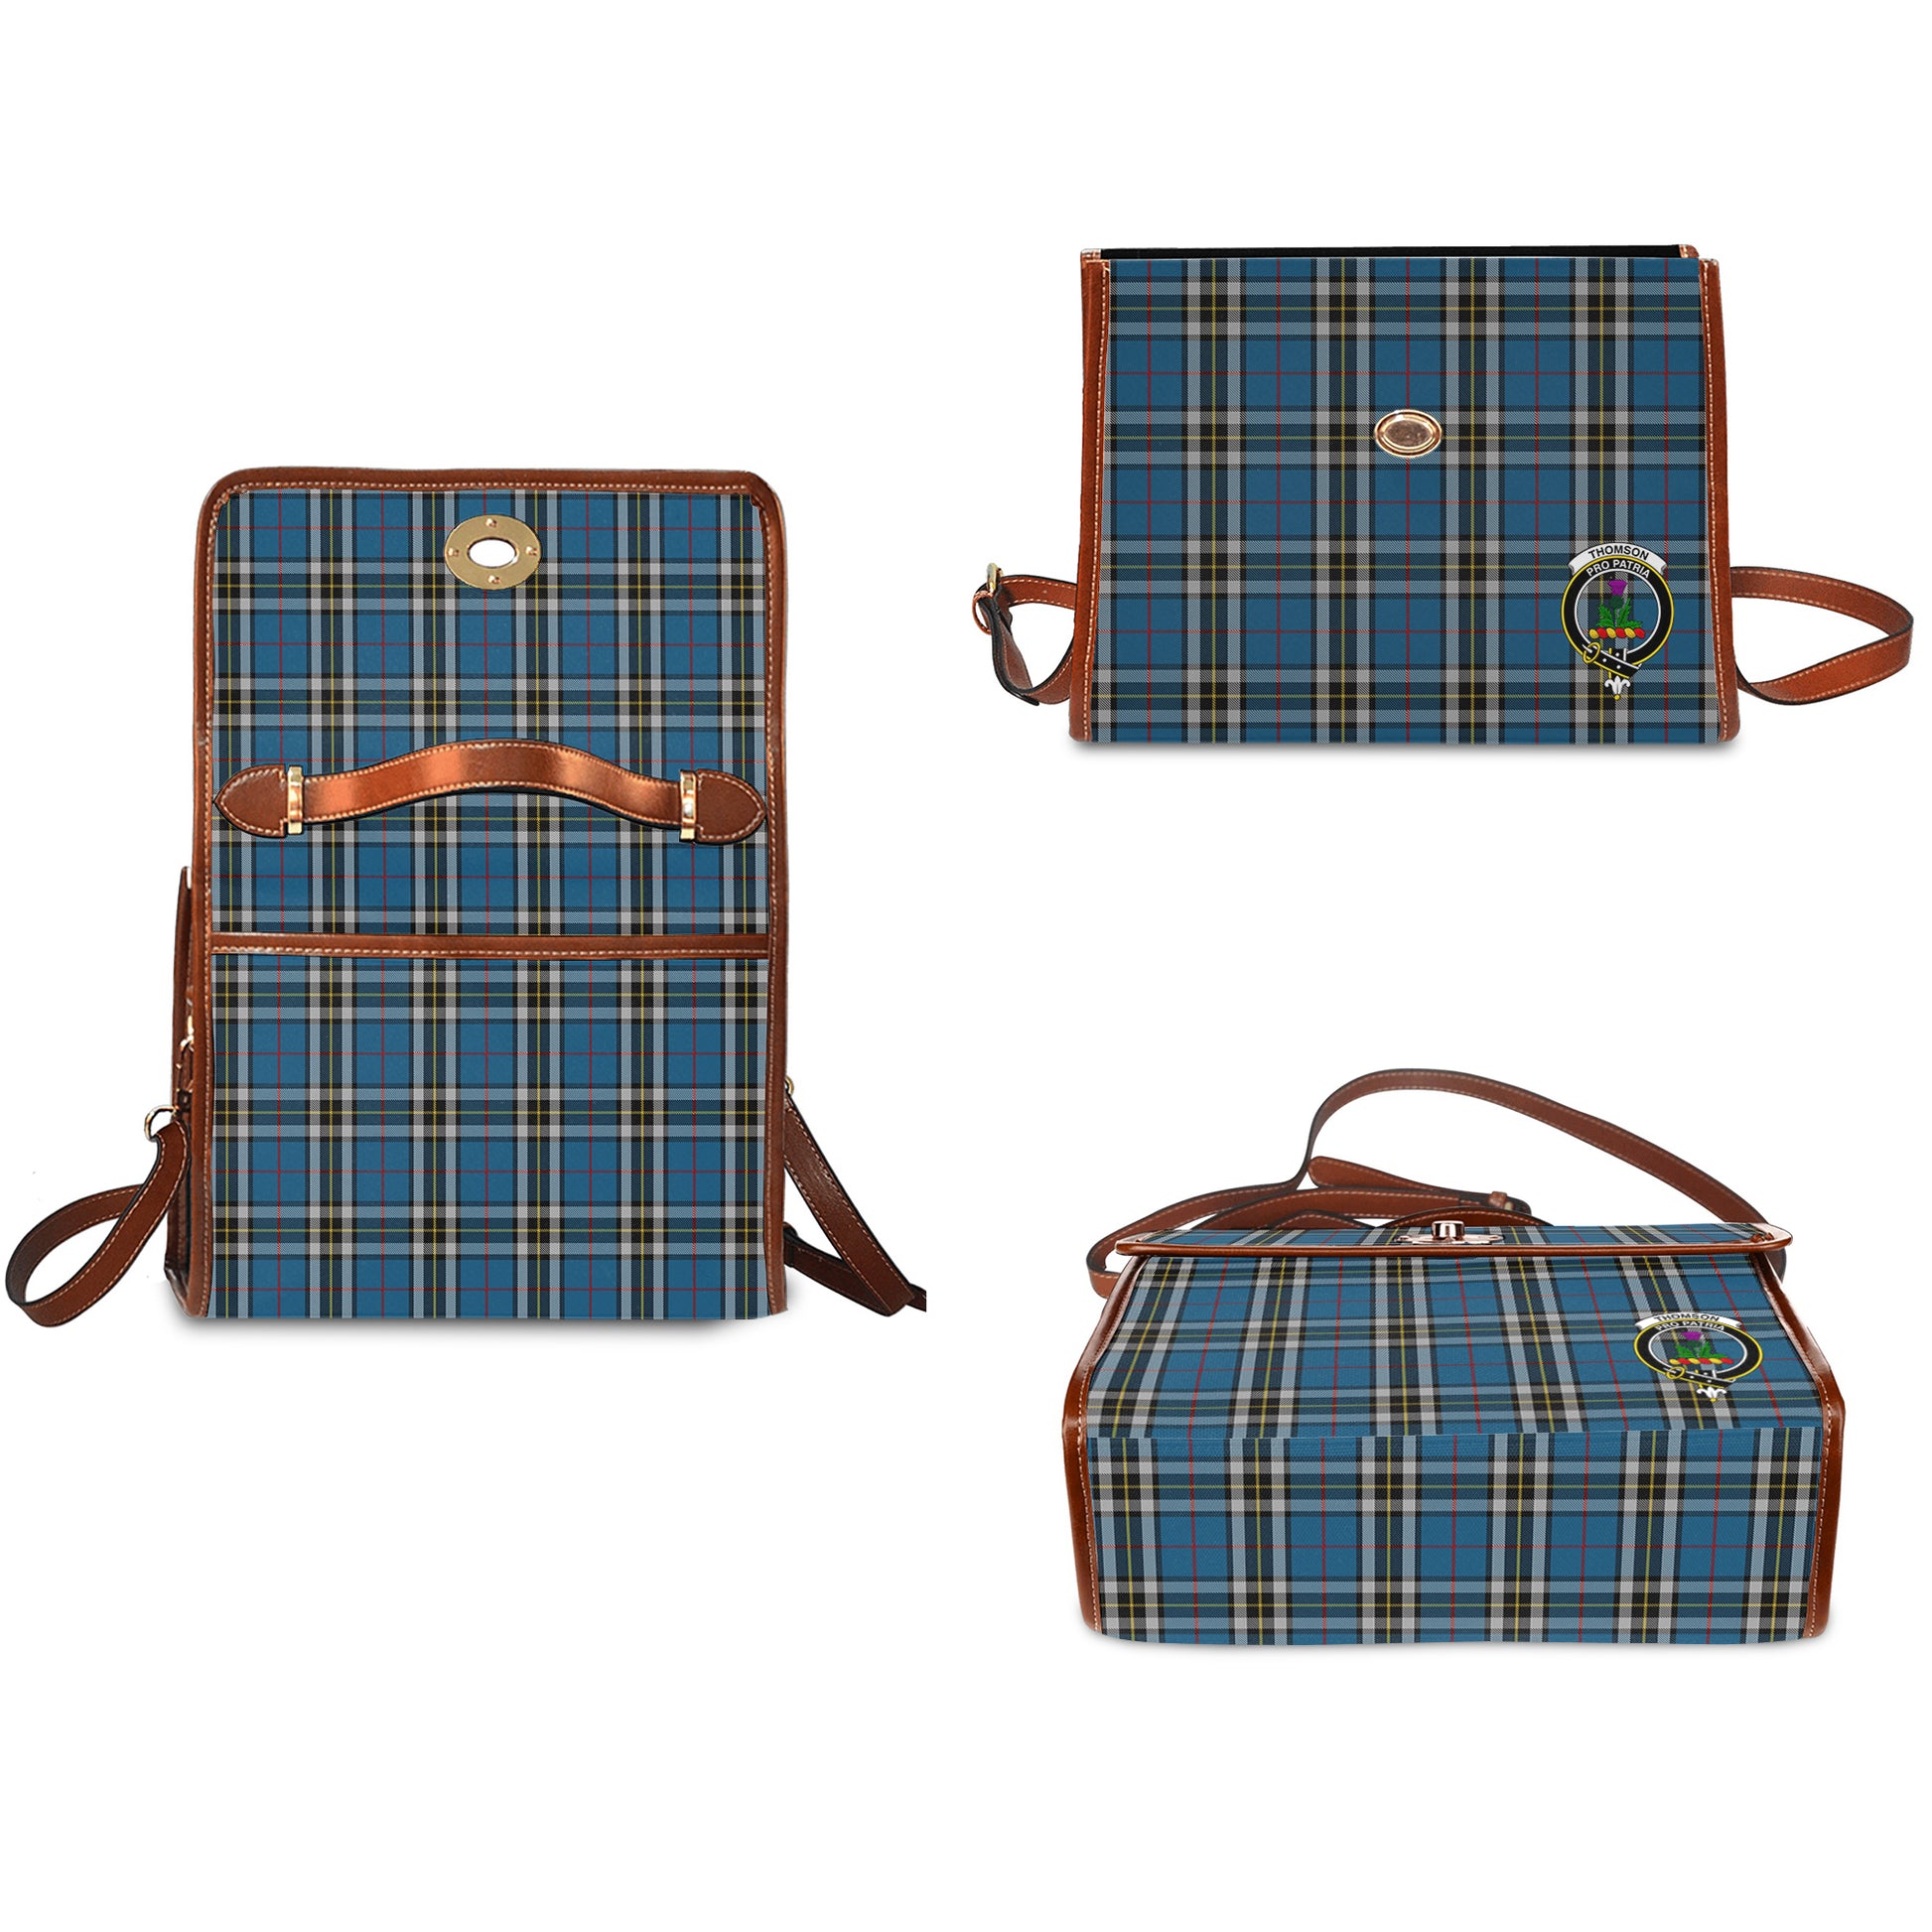 thomson-dress-blue-tartan-leather-strap-waterproof-canvas-bag-with-family-crest